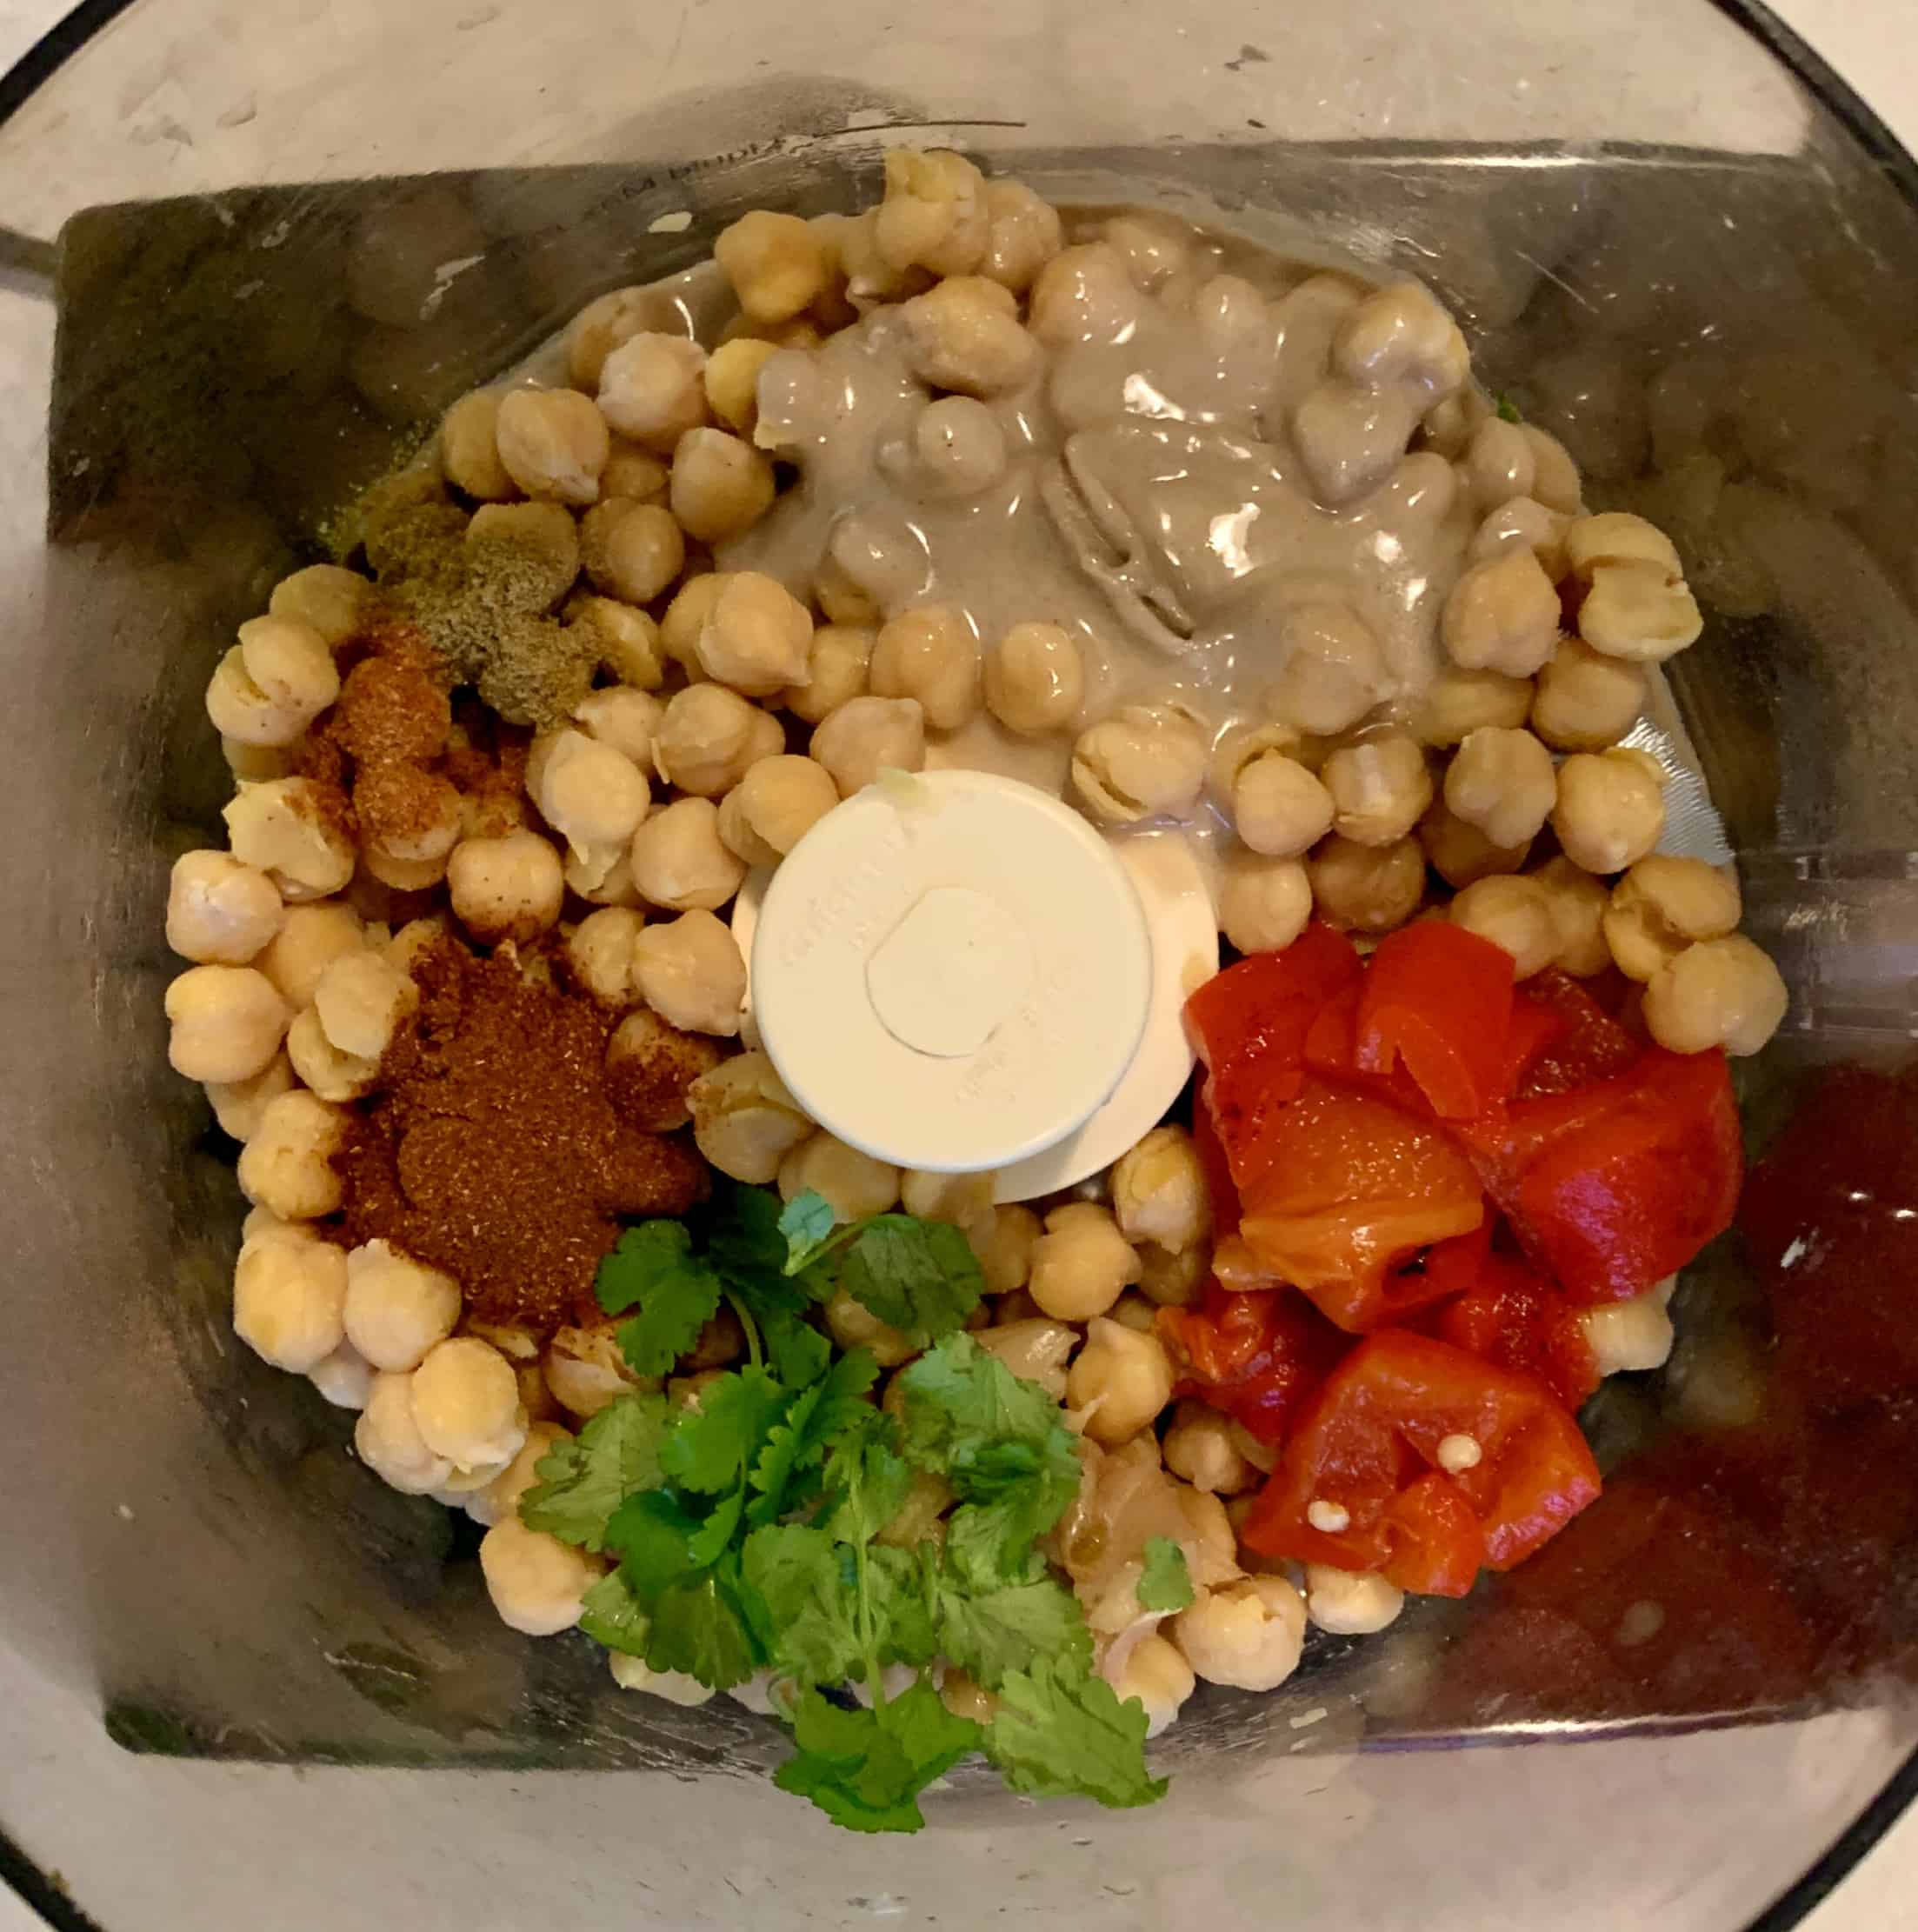 Hummus ingredients including chickpeas in a food processor